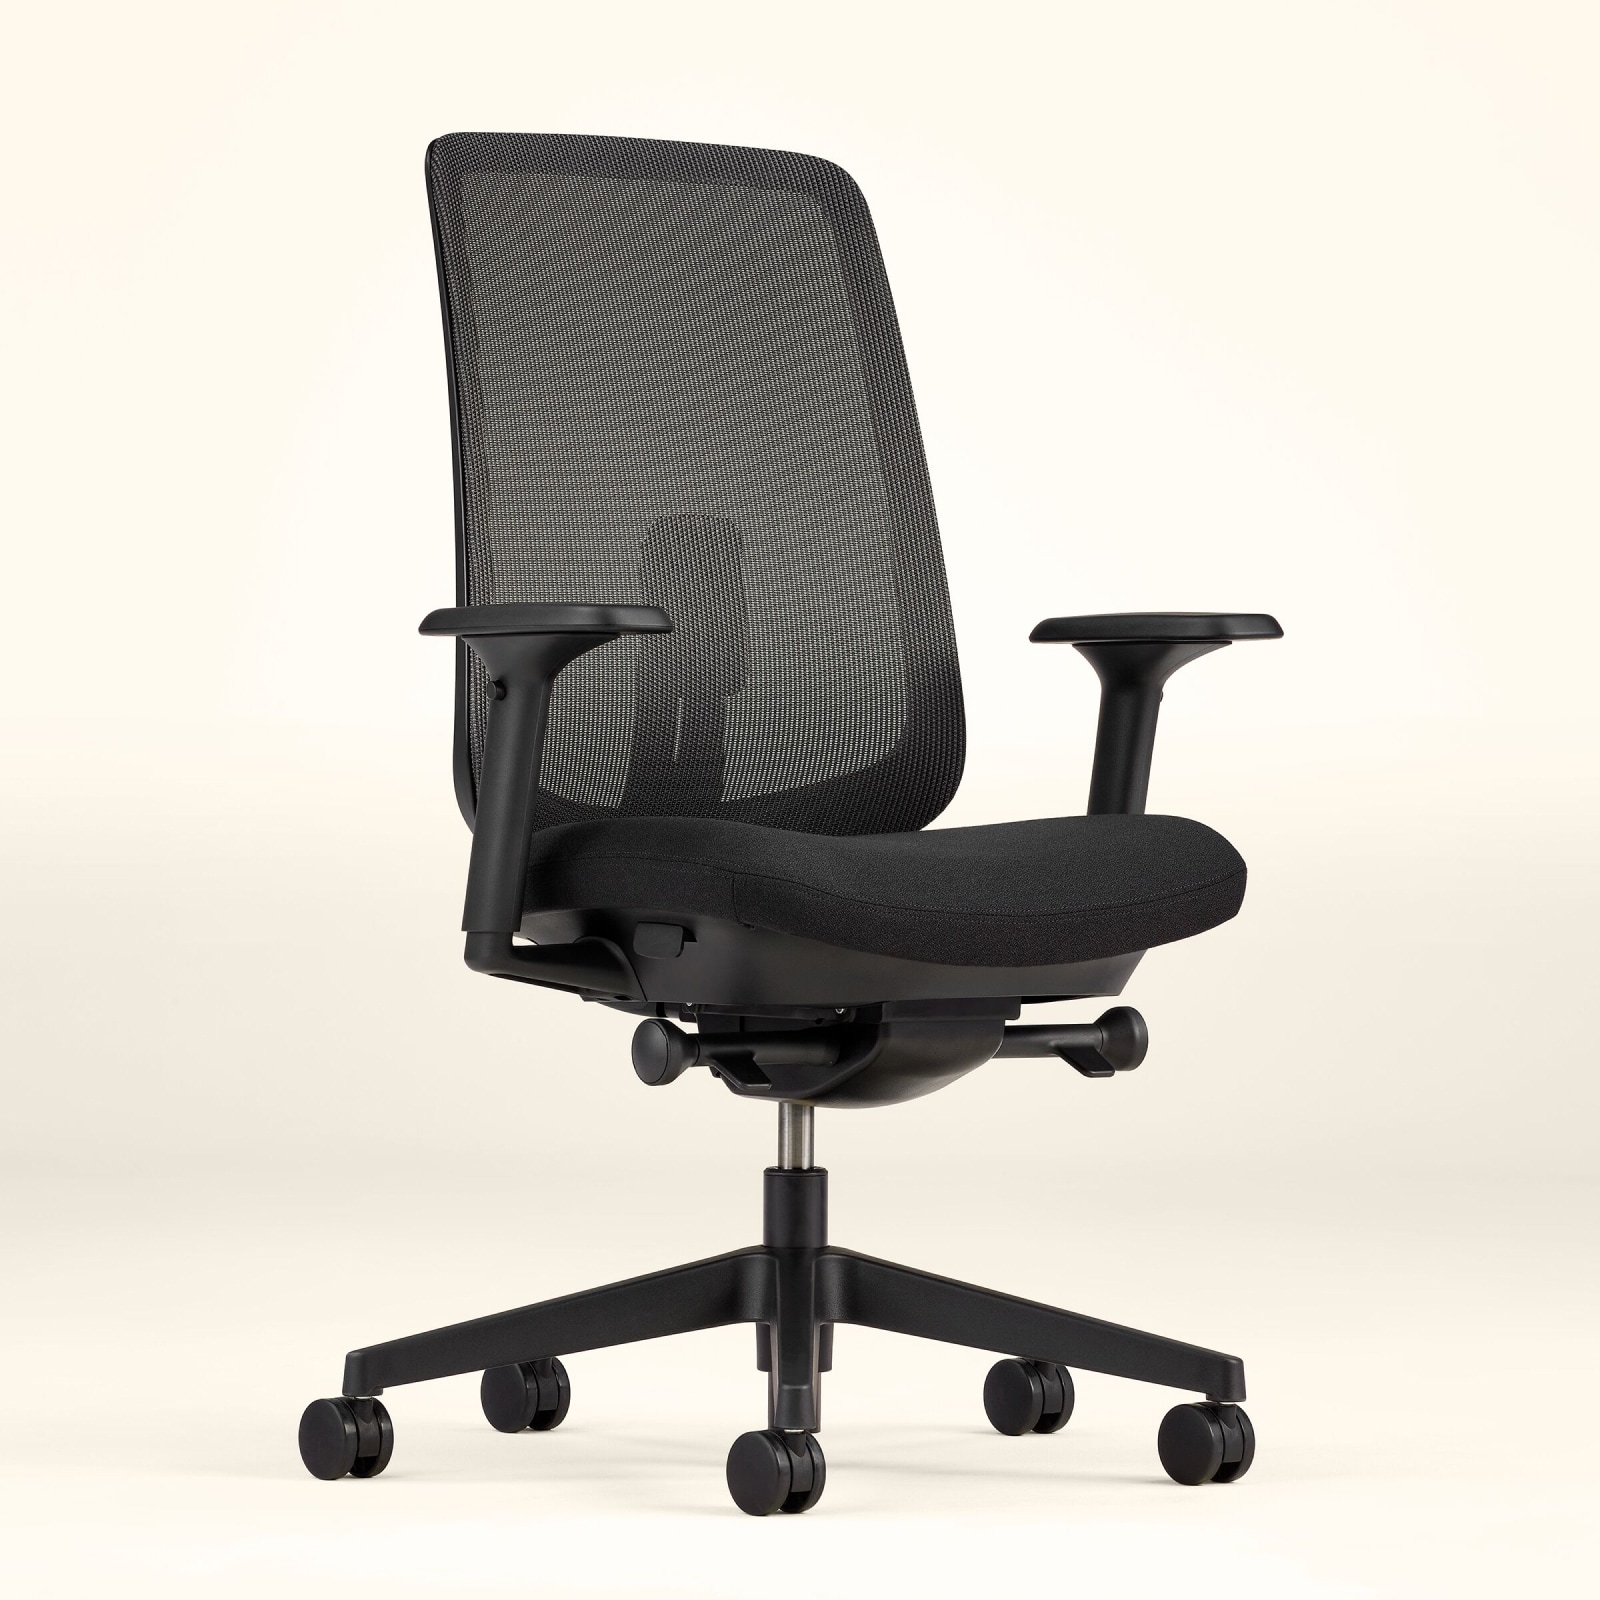 A Verus Chair with a black suspension back and a black seat and frame viewed at an angle with a pale yellow background.